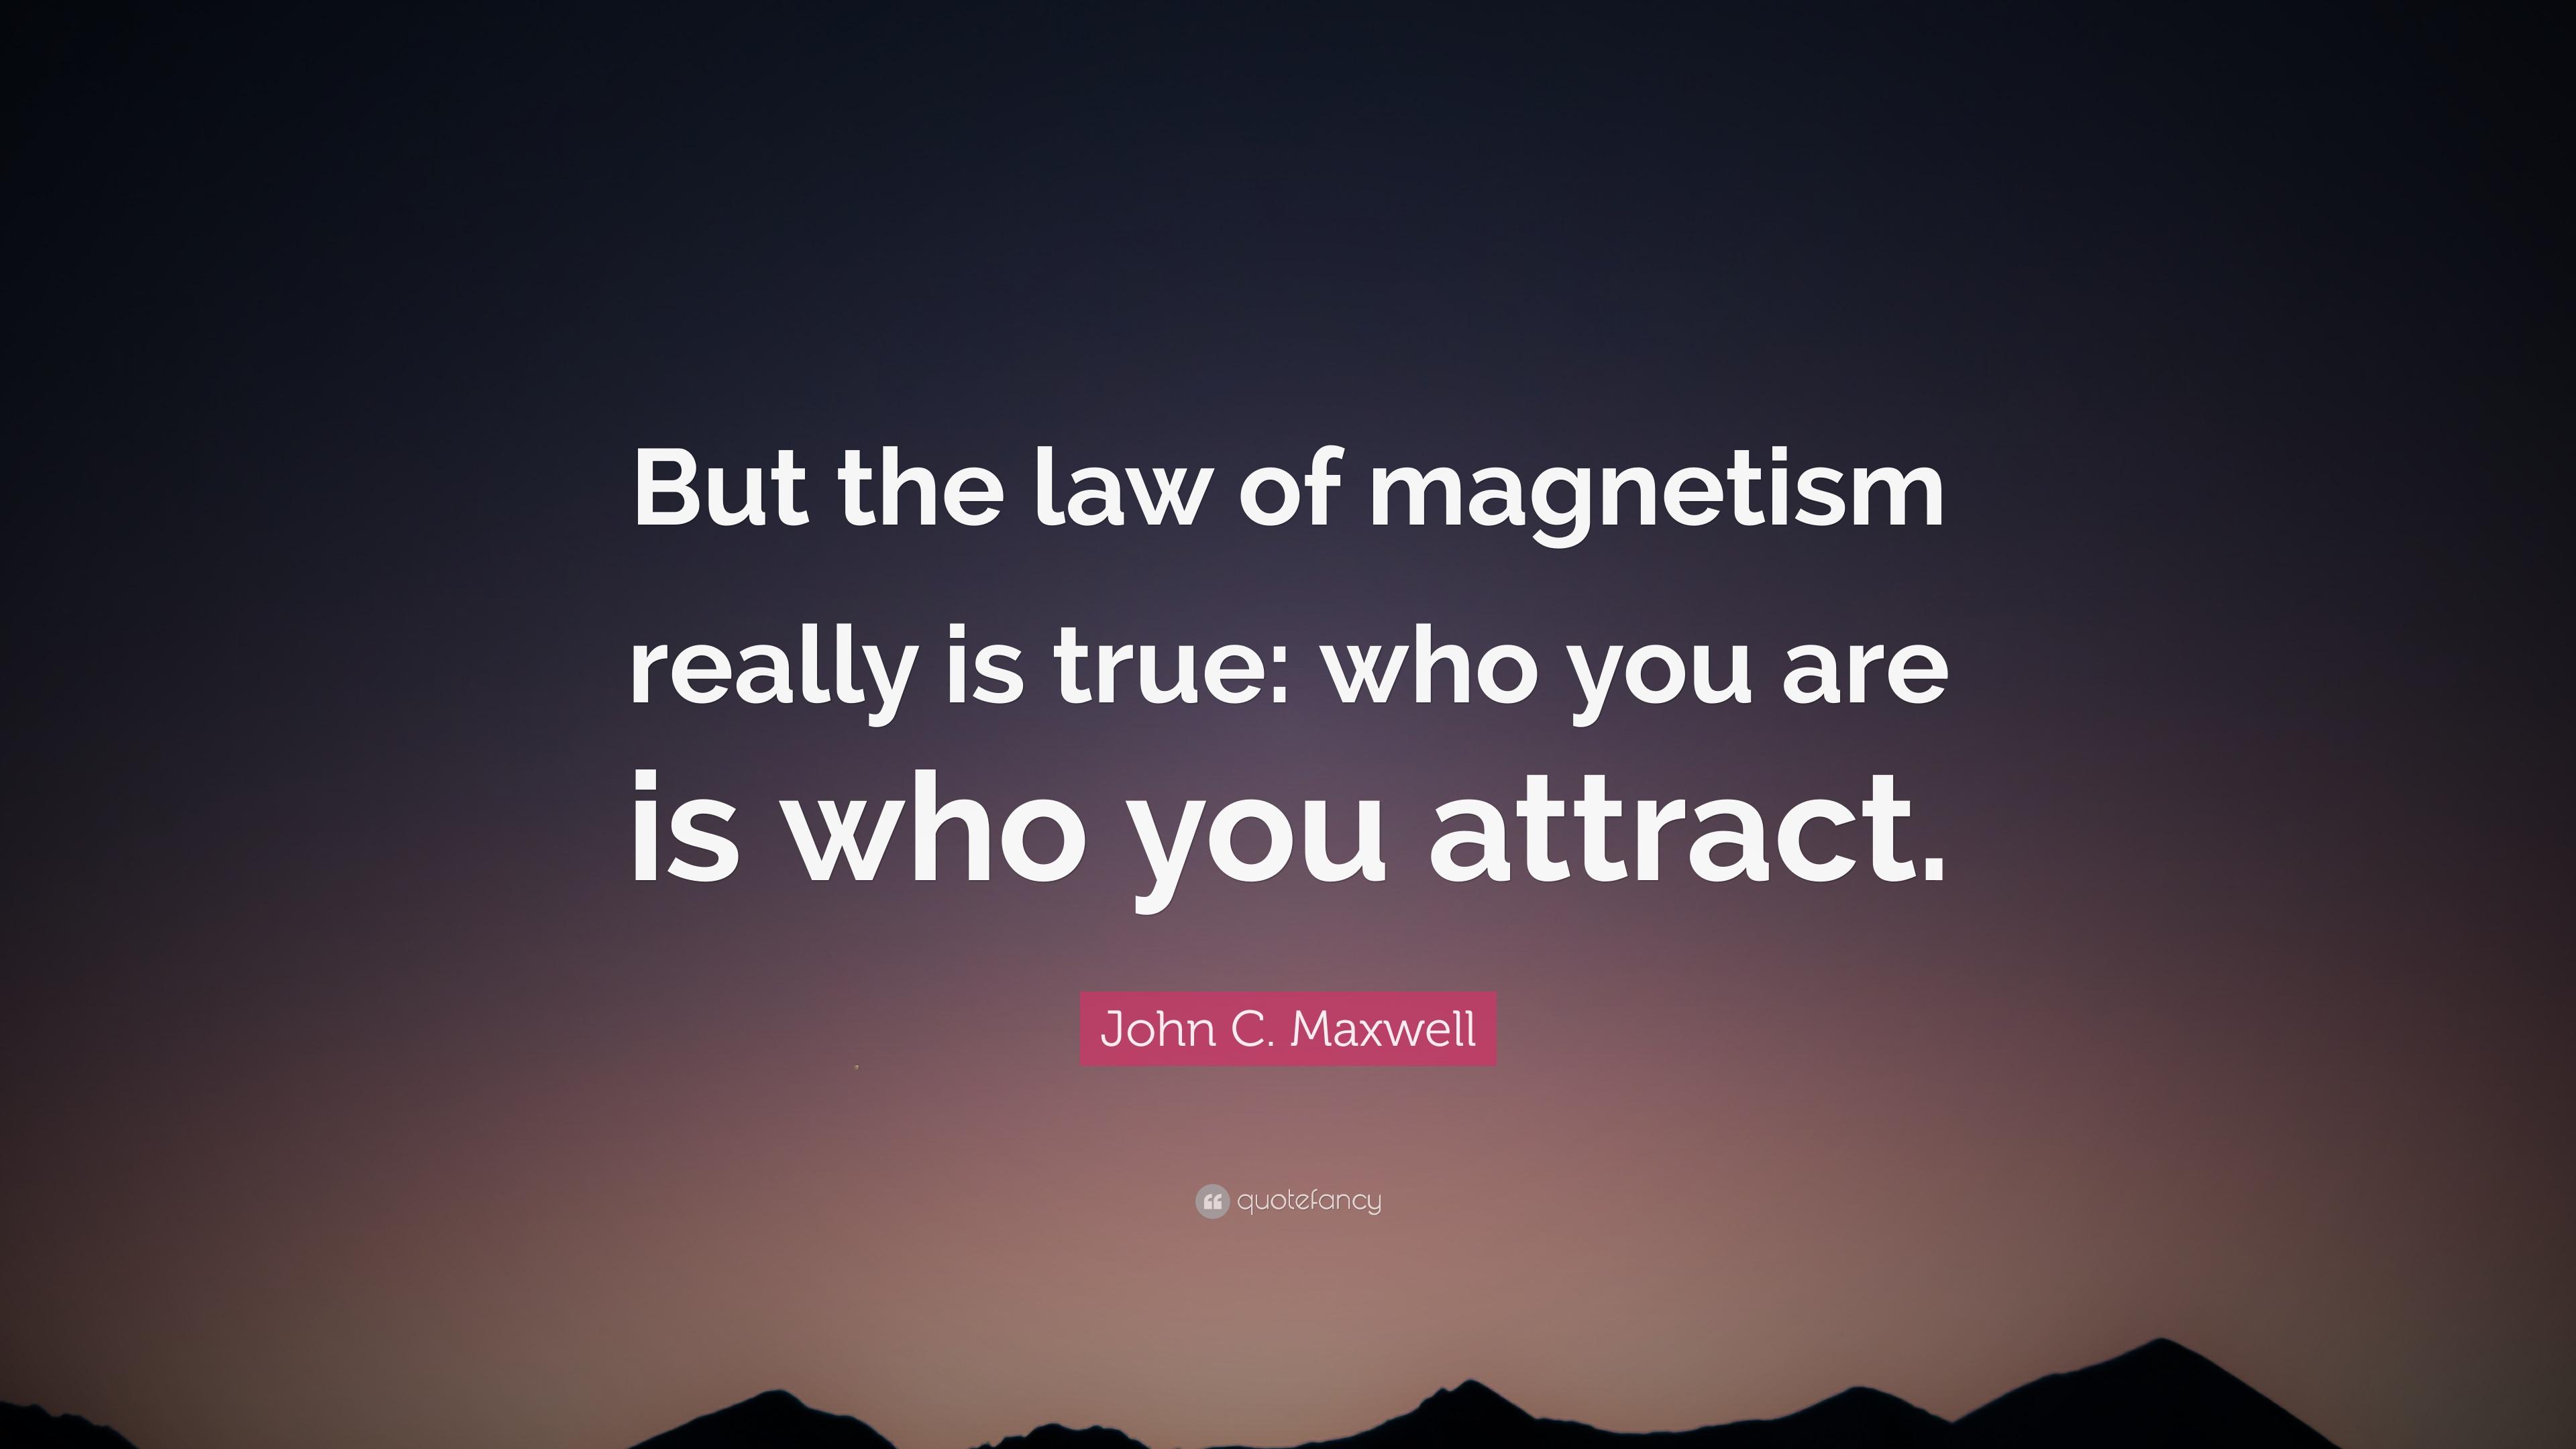 John C. Maxwell Quote: “But the law of magnetism really is